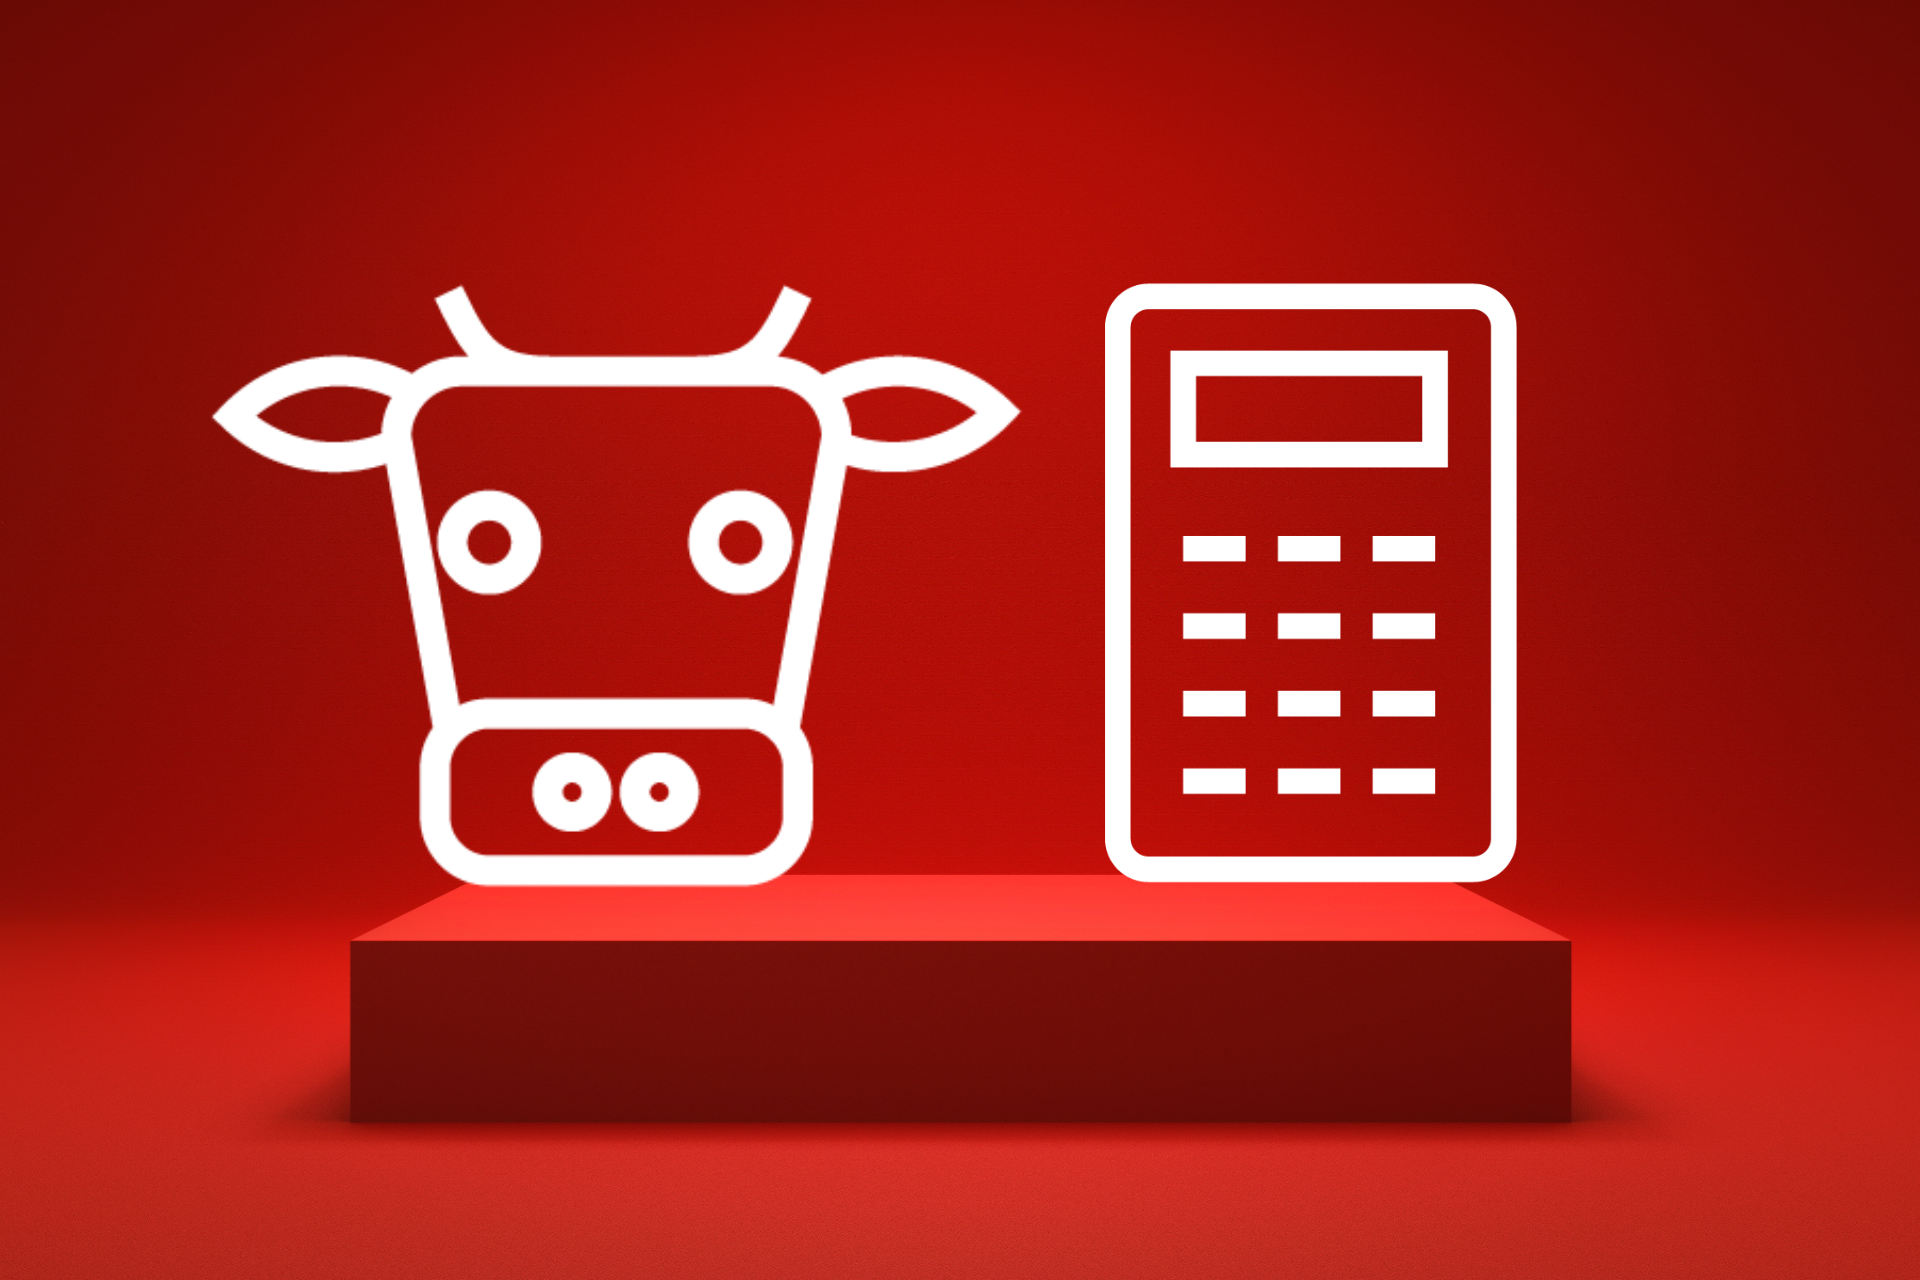 The image shows two white icon illustrations on a red background. One icon depicts a stylized cow or bull with big eyes and horns, representing livestock or farm animals. The other icon is a simplified calculator or keypad device. These two icons seem to represent agricultural calculations, livestock management, or farm accounting software or tools.